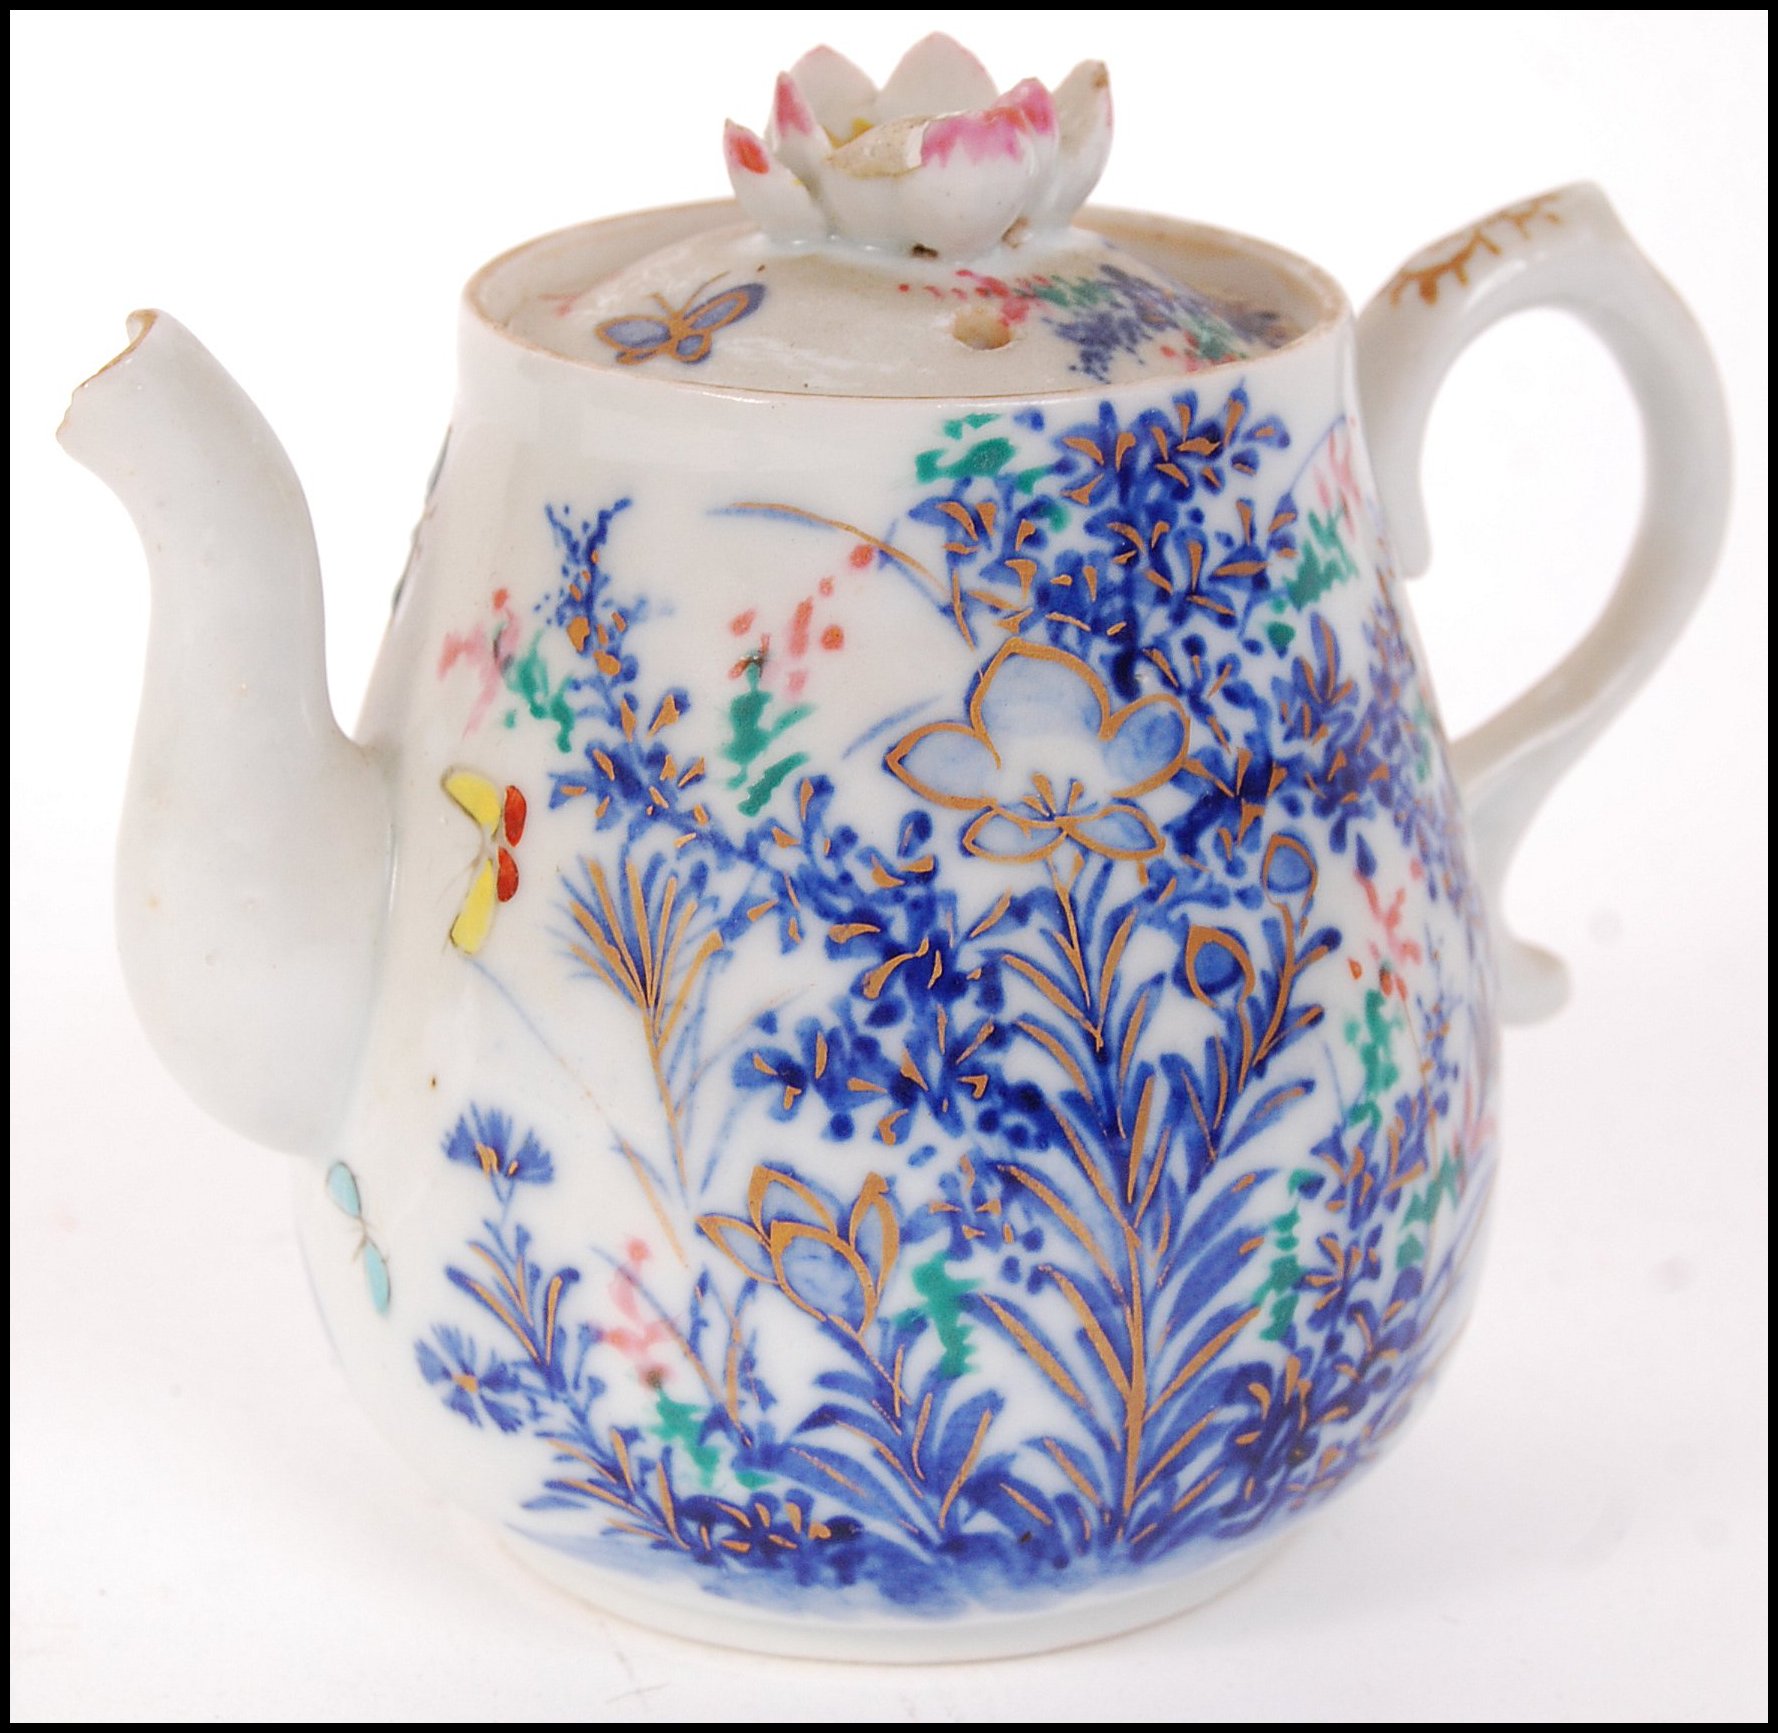 An unusual 18th century Chinese porcelain oriental enamel handpainted decorated teapot of small form